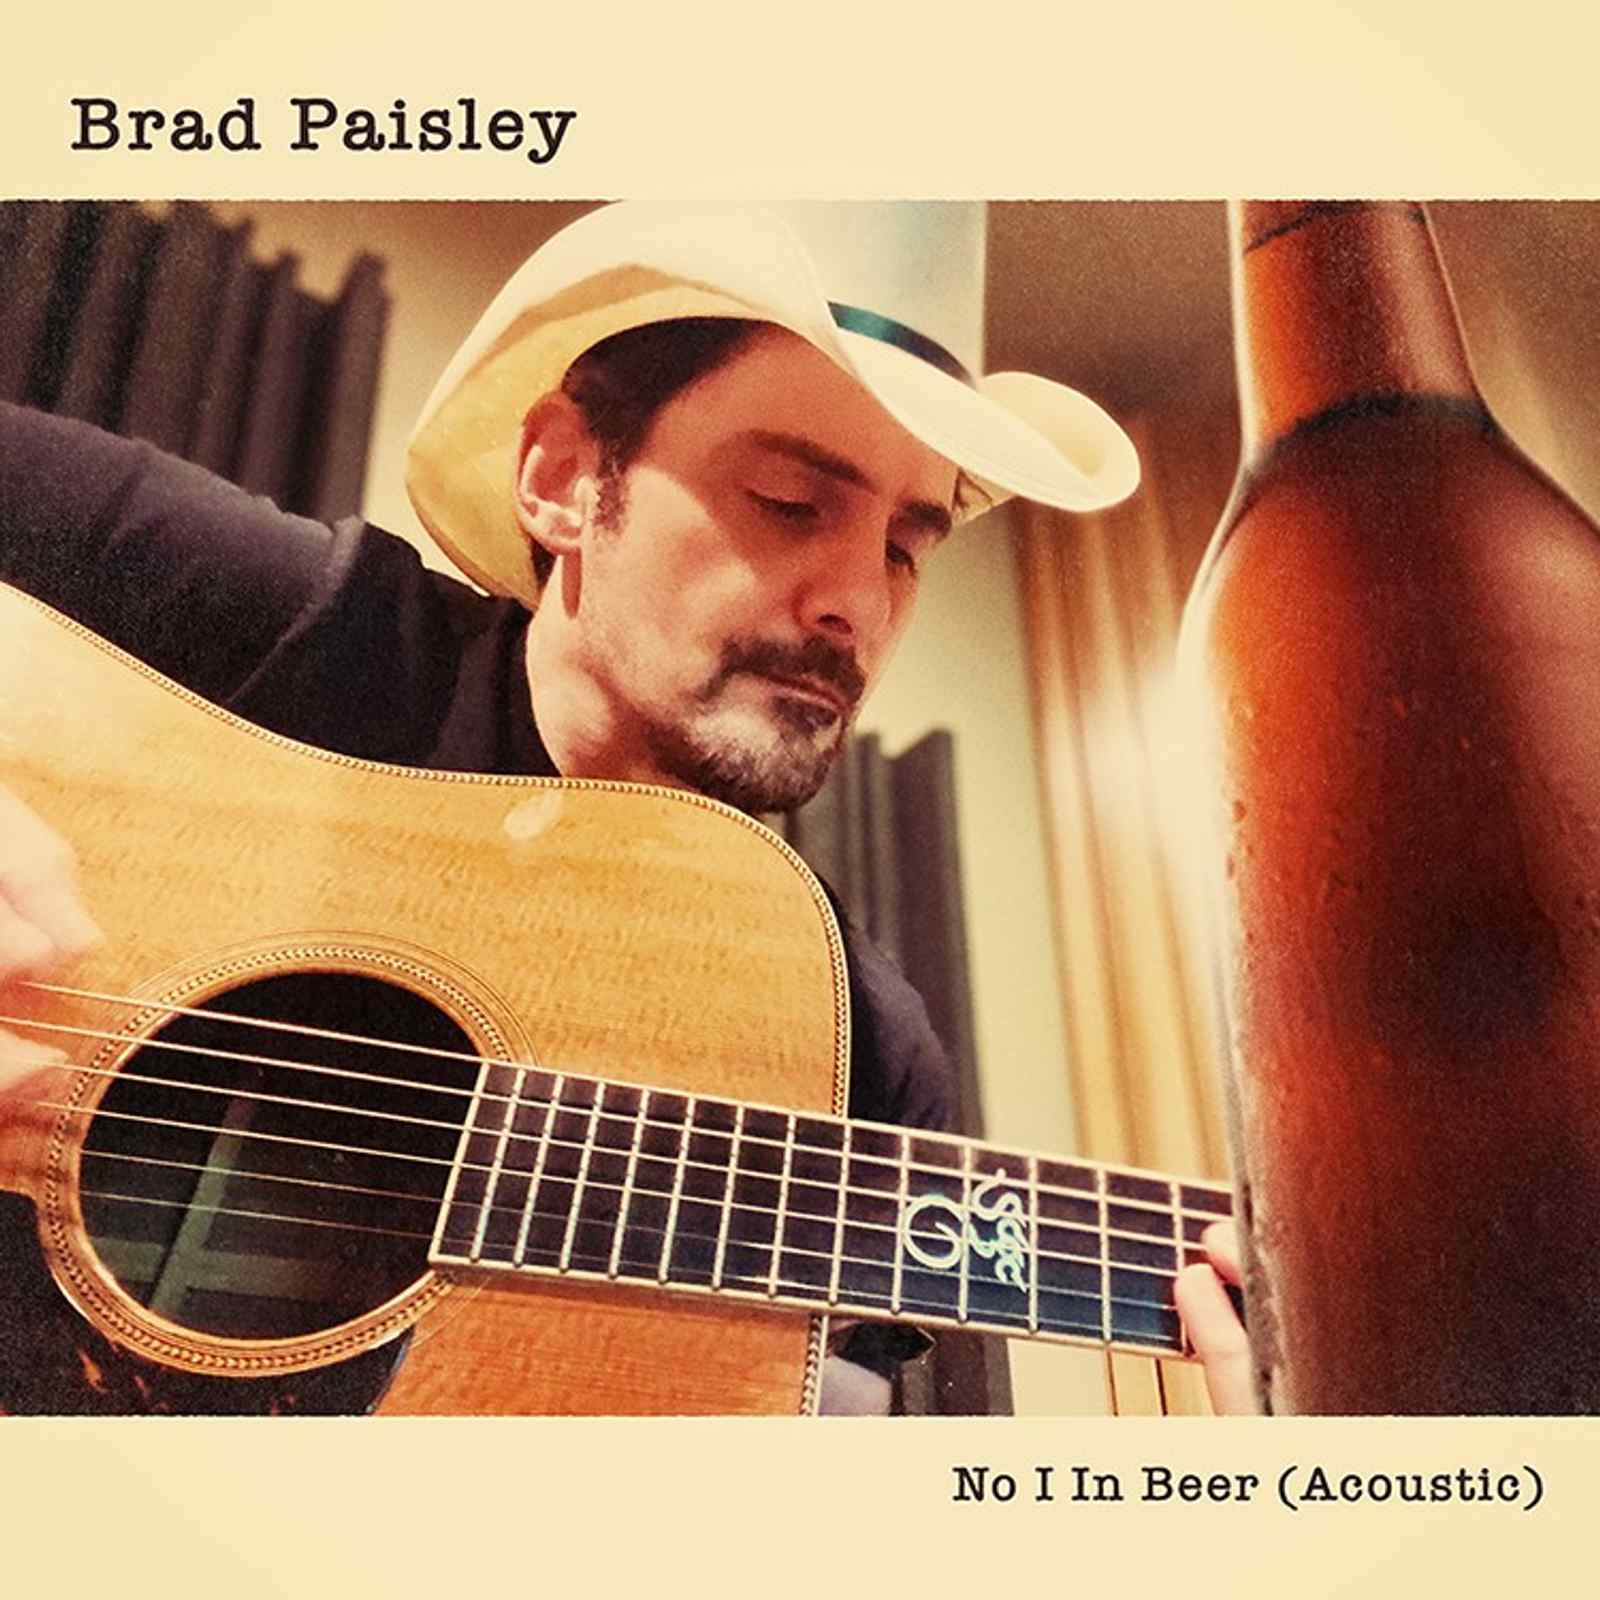 New Song: "No I In Beer" (Acoustic) by Brad Paisley